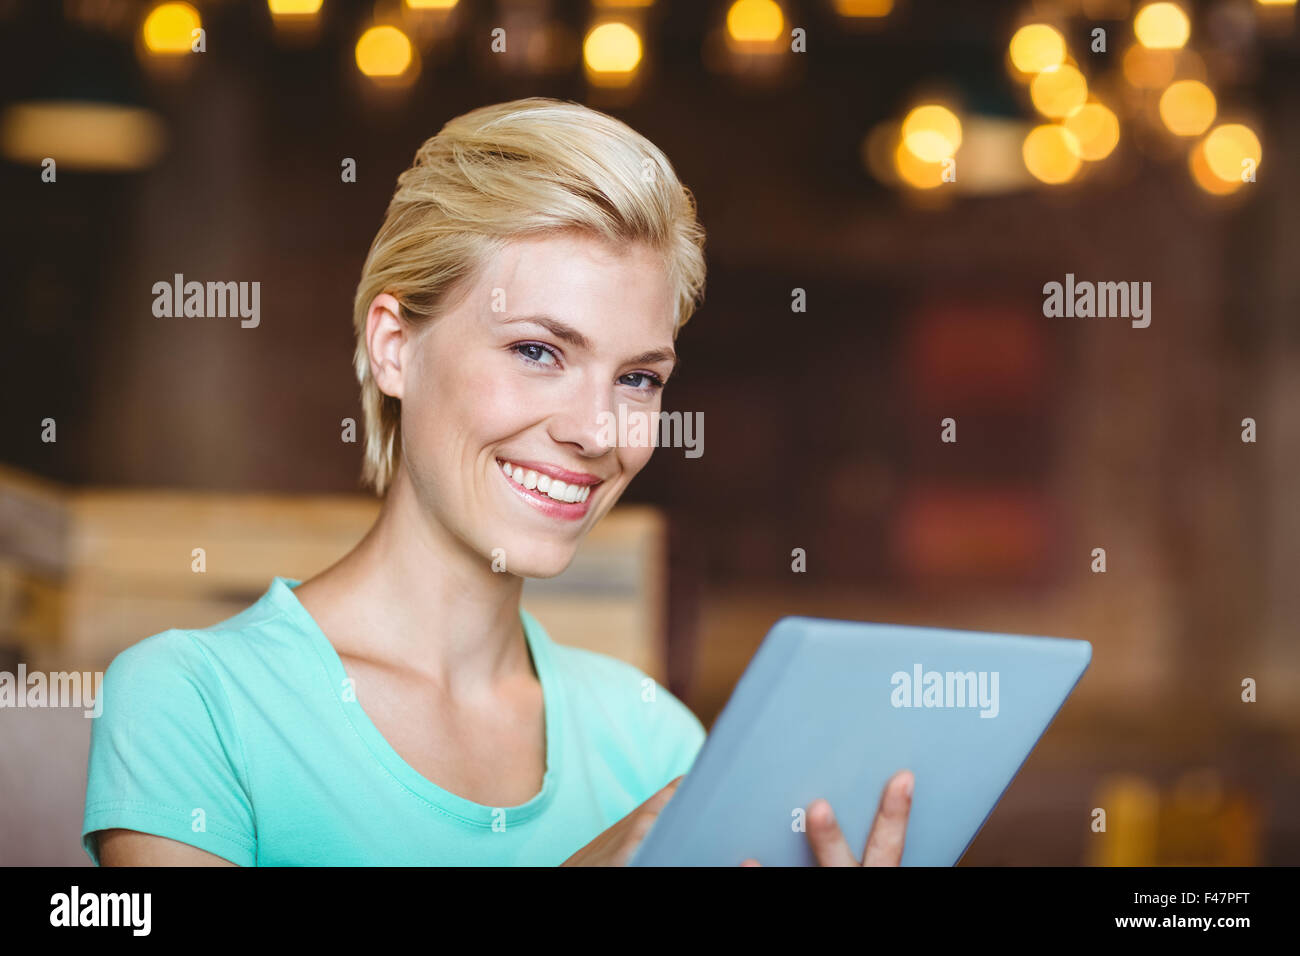 Pretty blonde using tablet computer Stock Photo